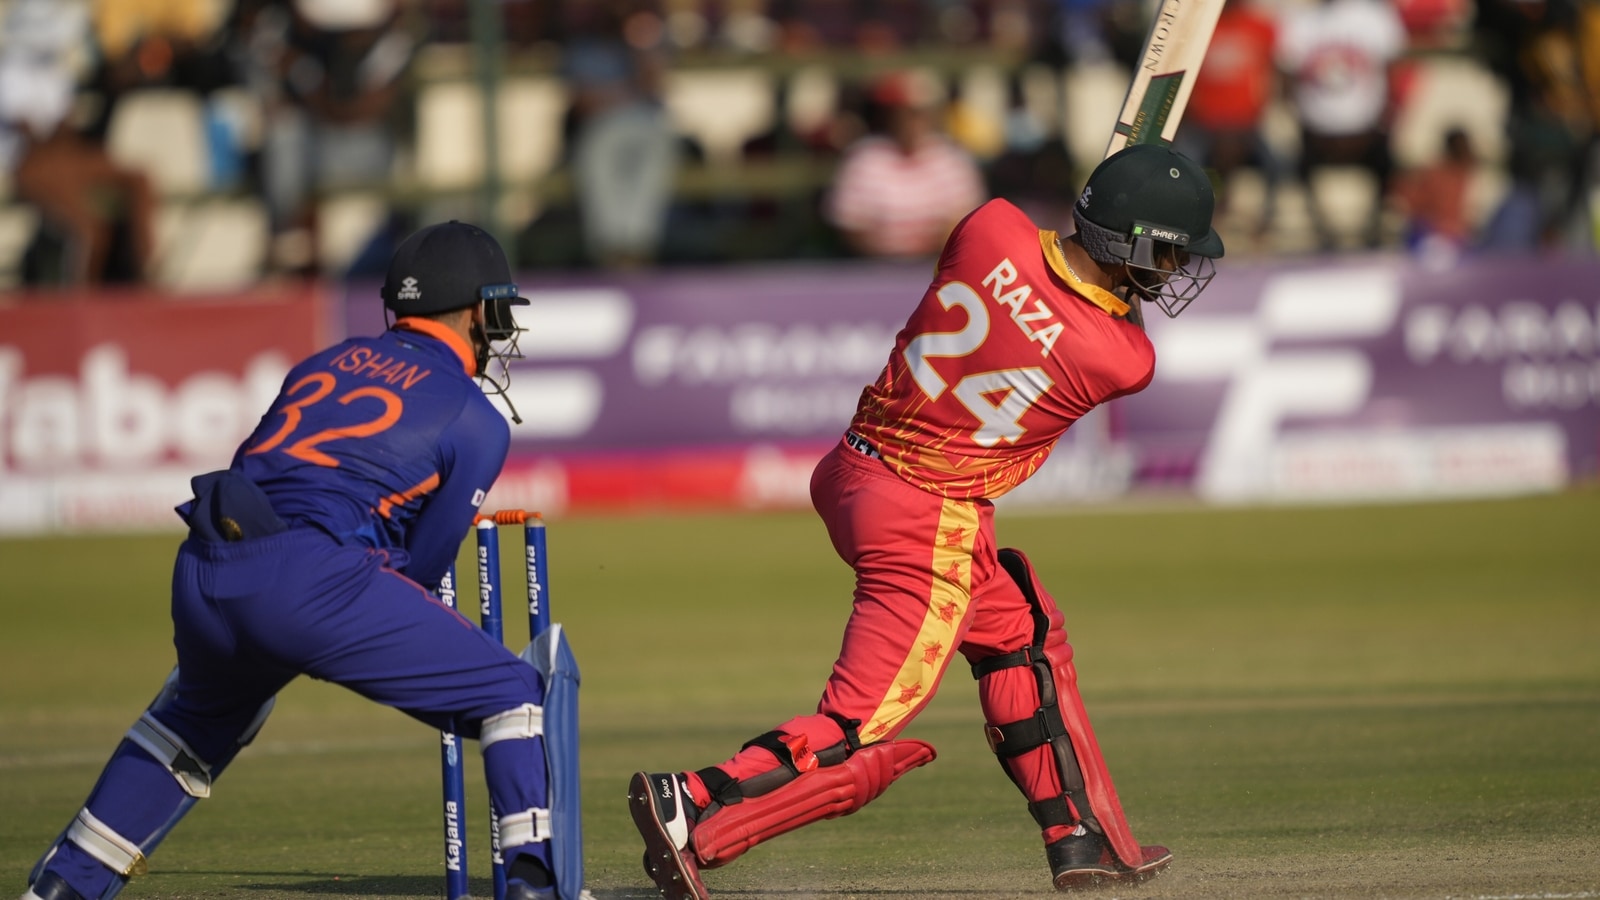 india-vs-zimbabwe-3rd-odi-highlights-ind-win-thriller-by-13-runs-after-raza-century-takes-zim-close-to-shock-victory